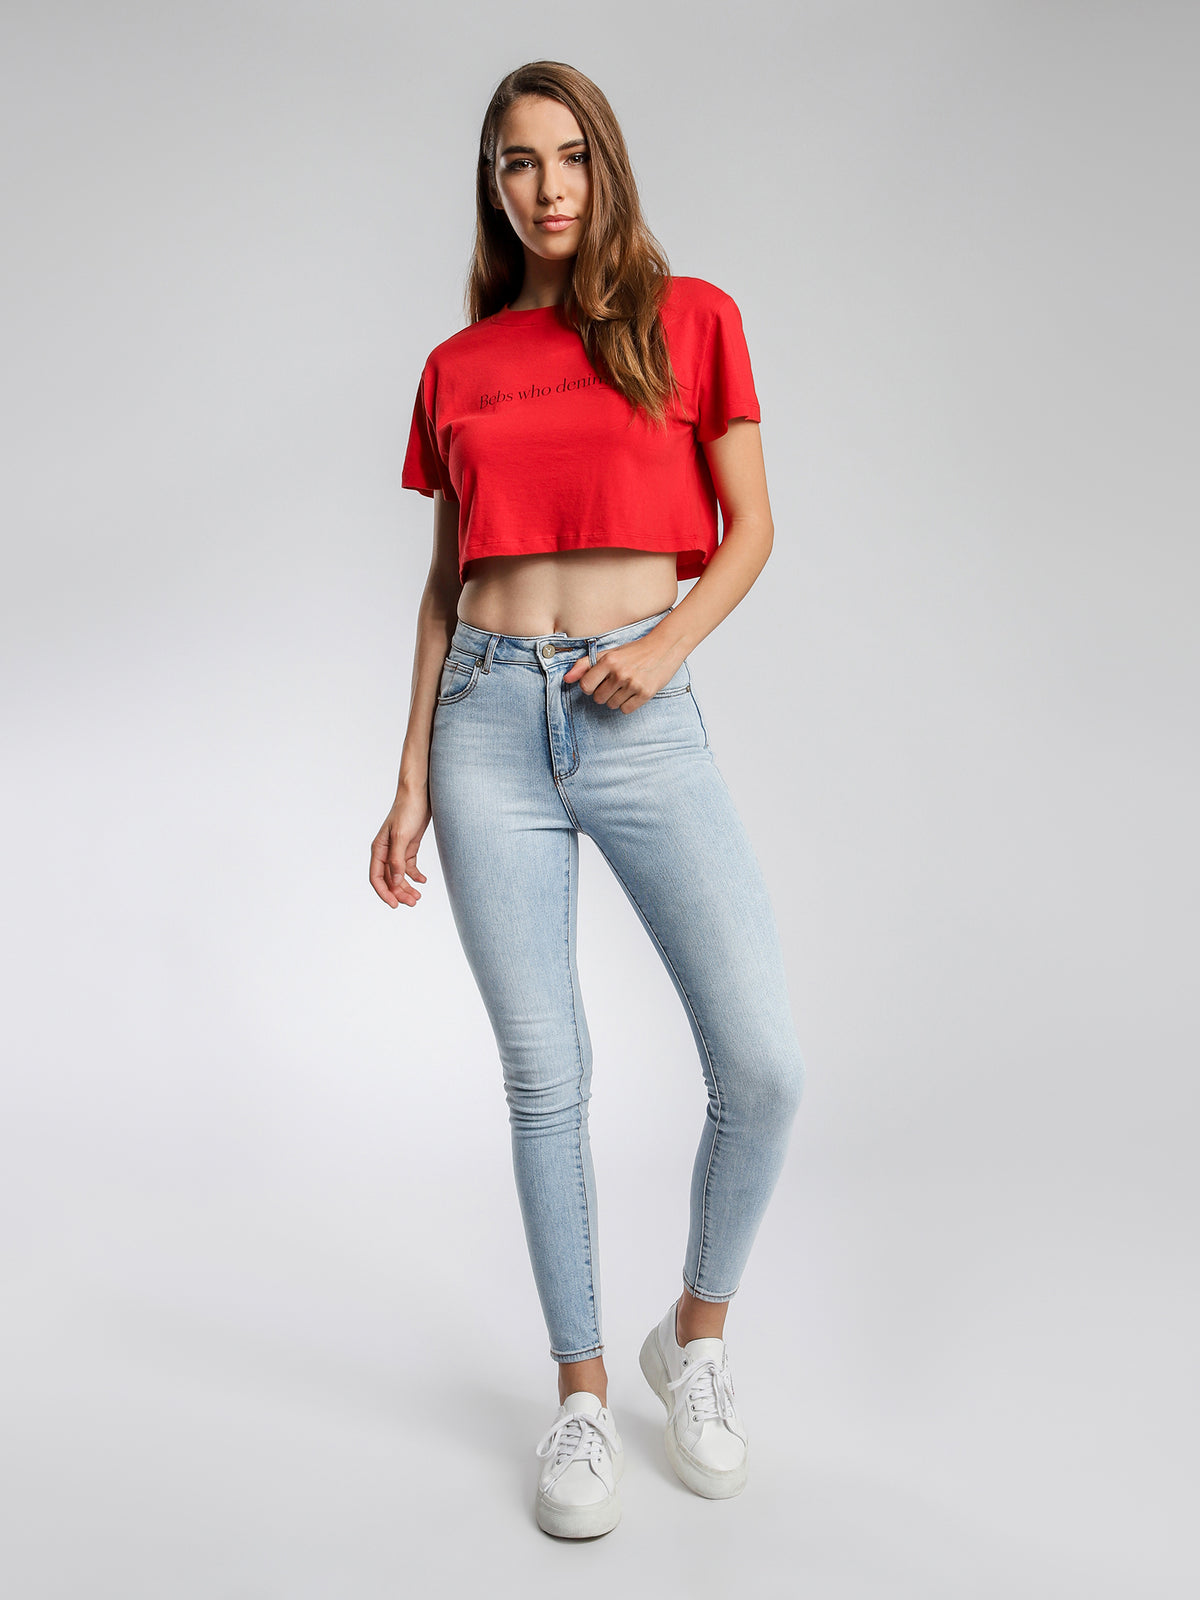 A Get Up Cropped T-Shirt in Red